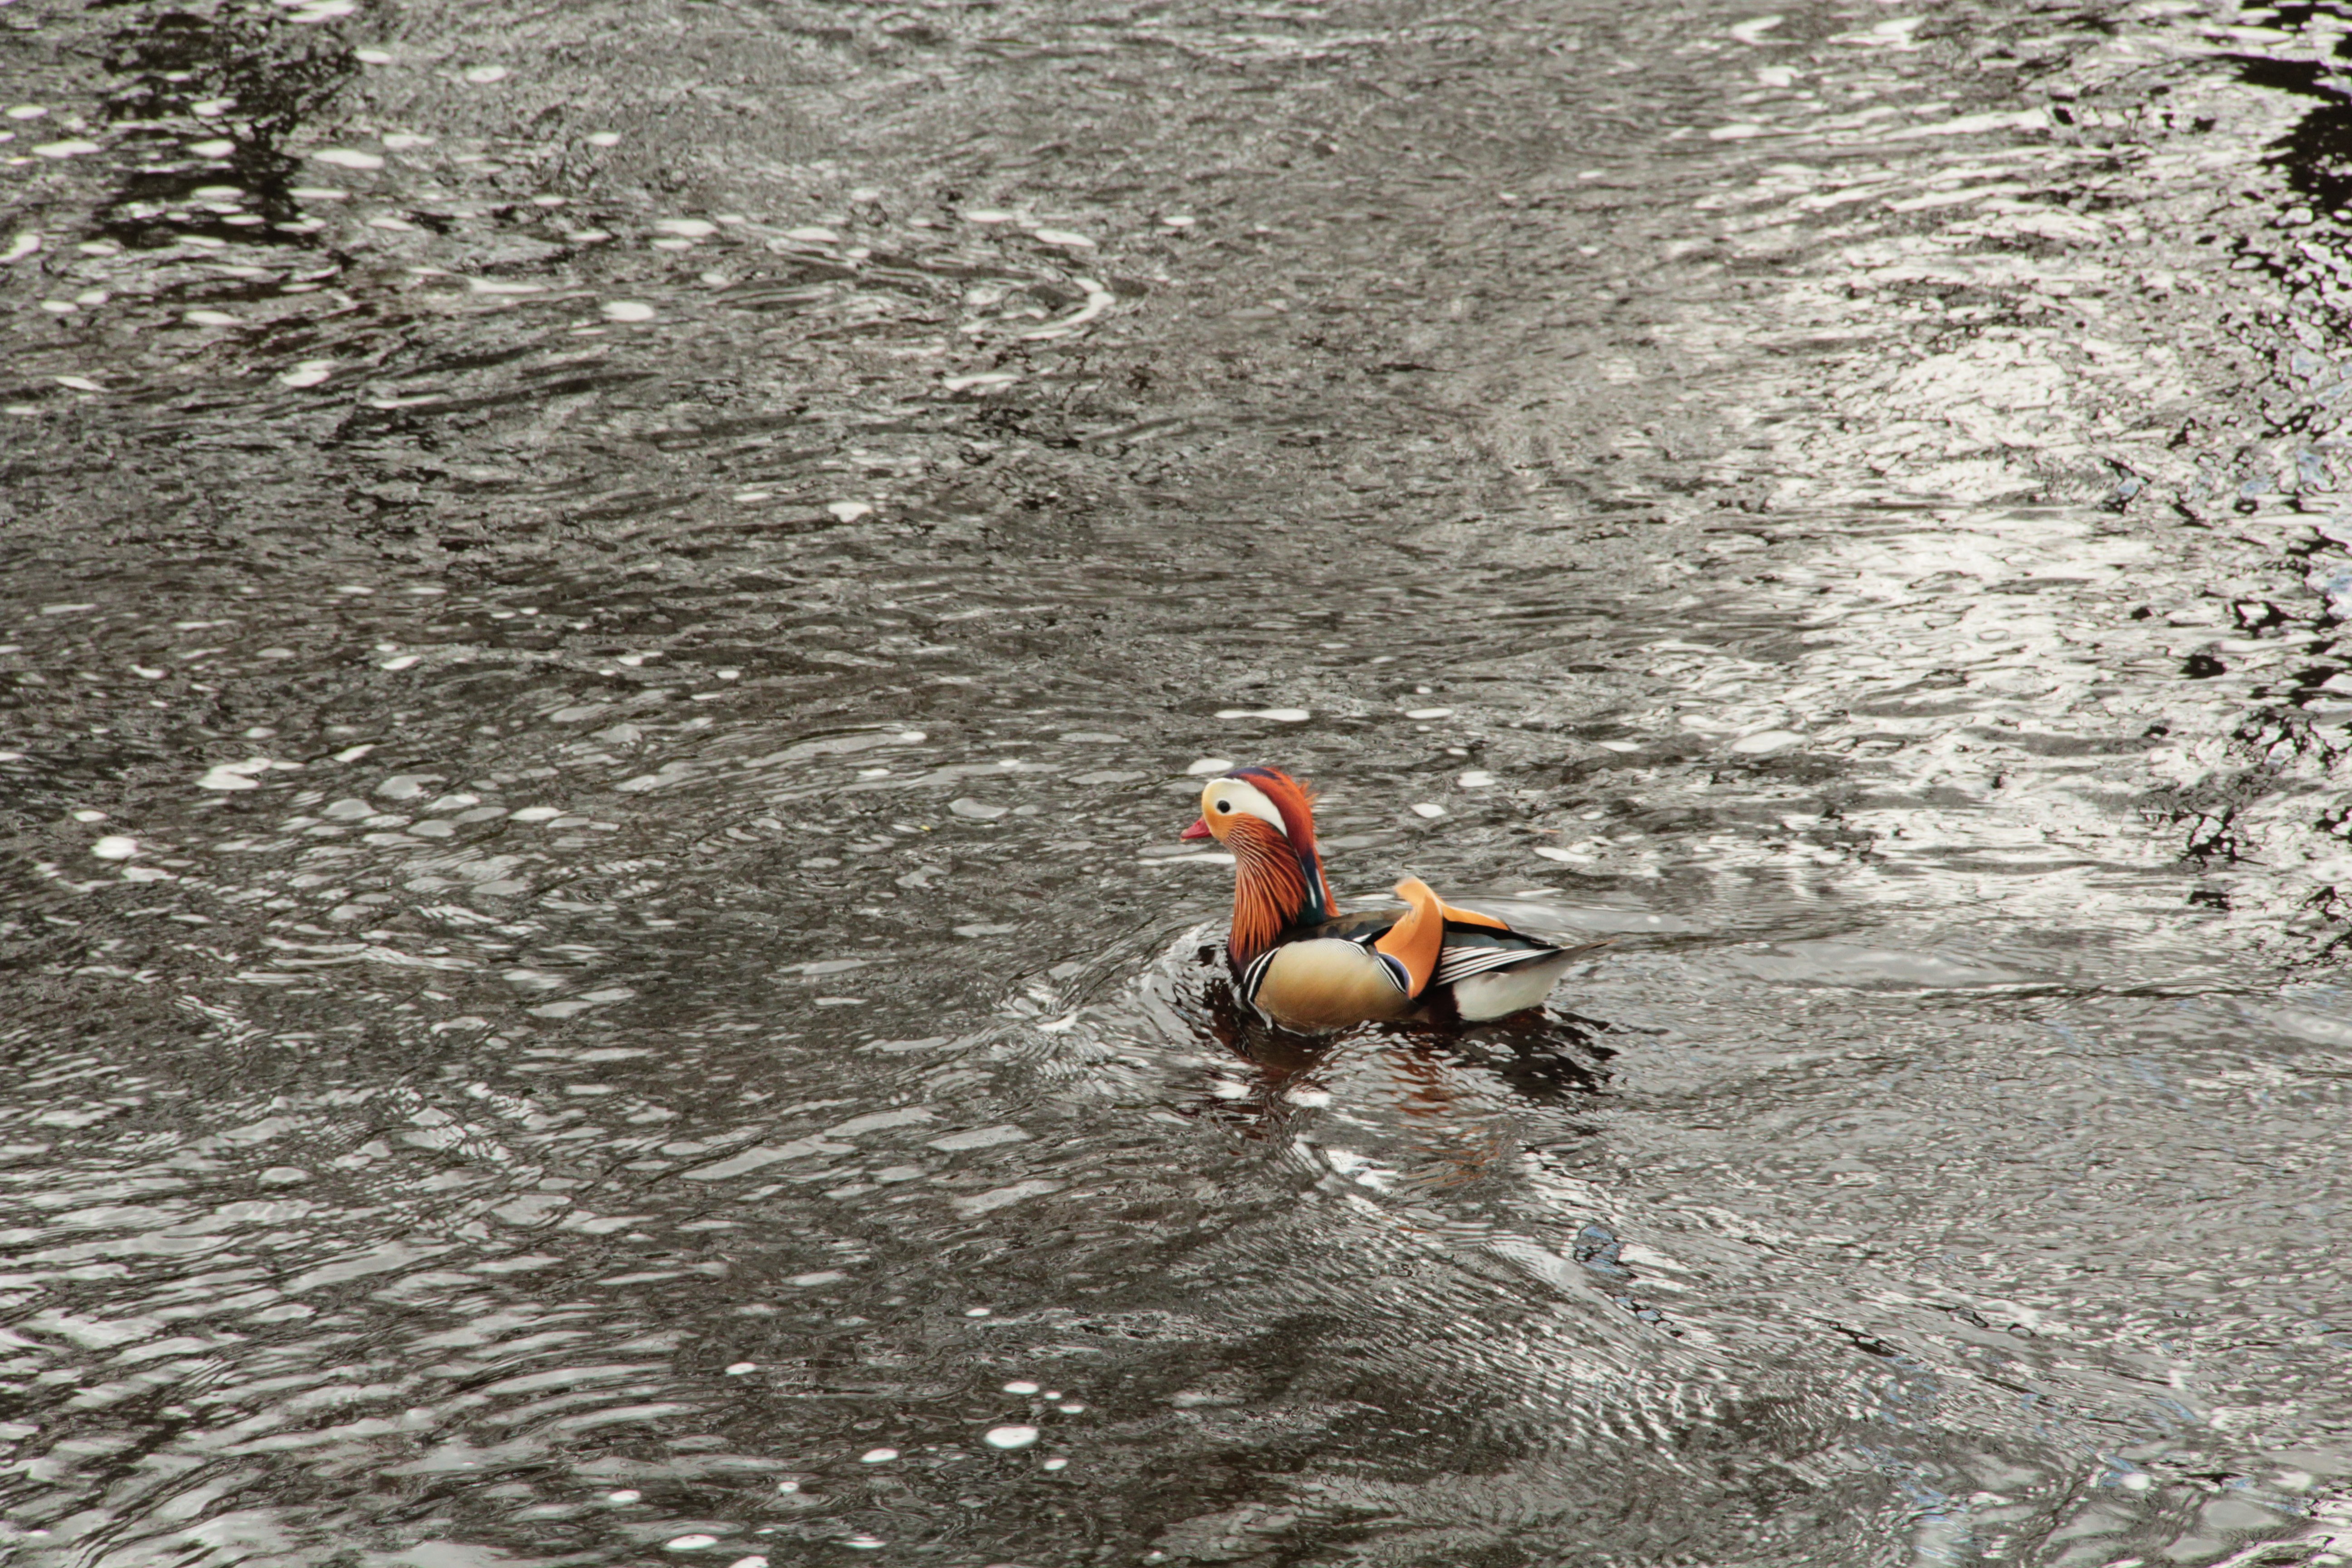 Mandarin duck on the banks of the Ribble.